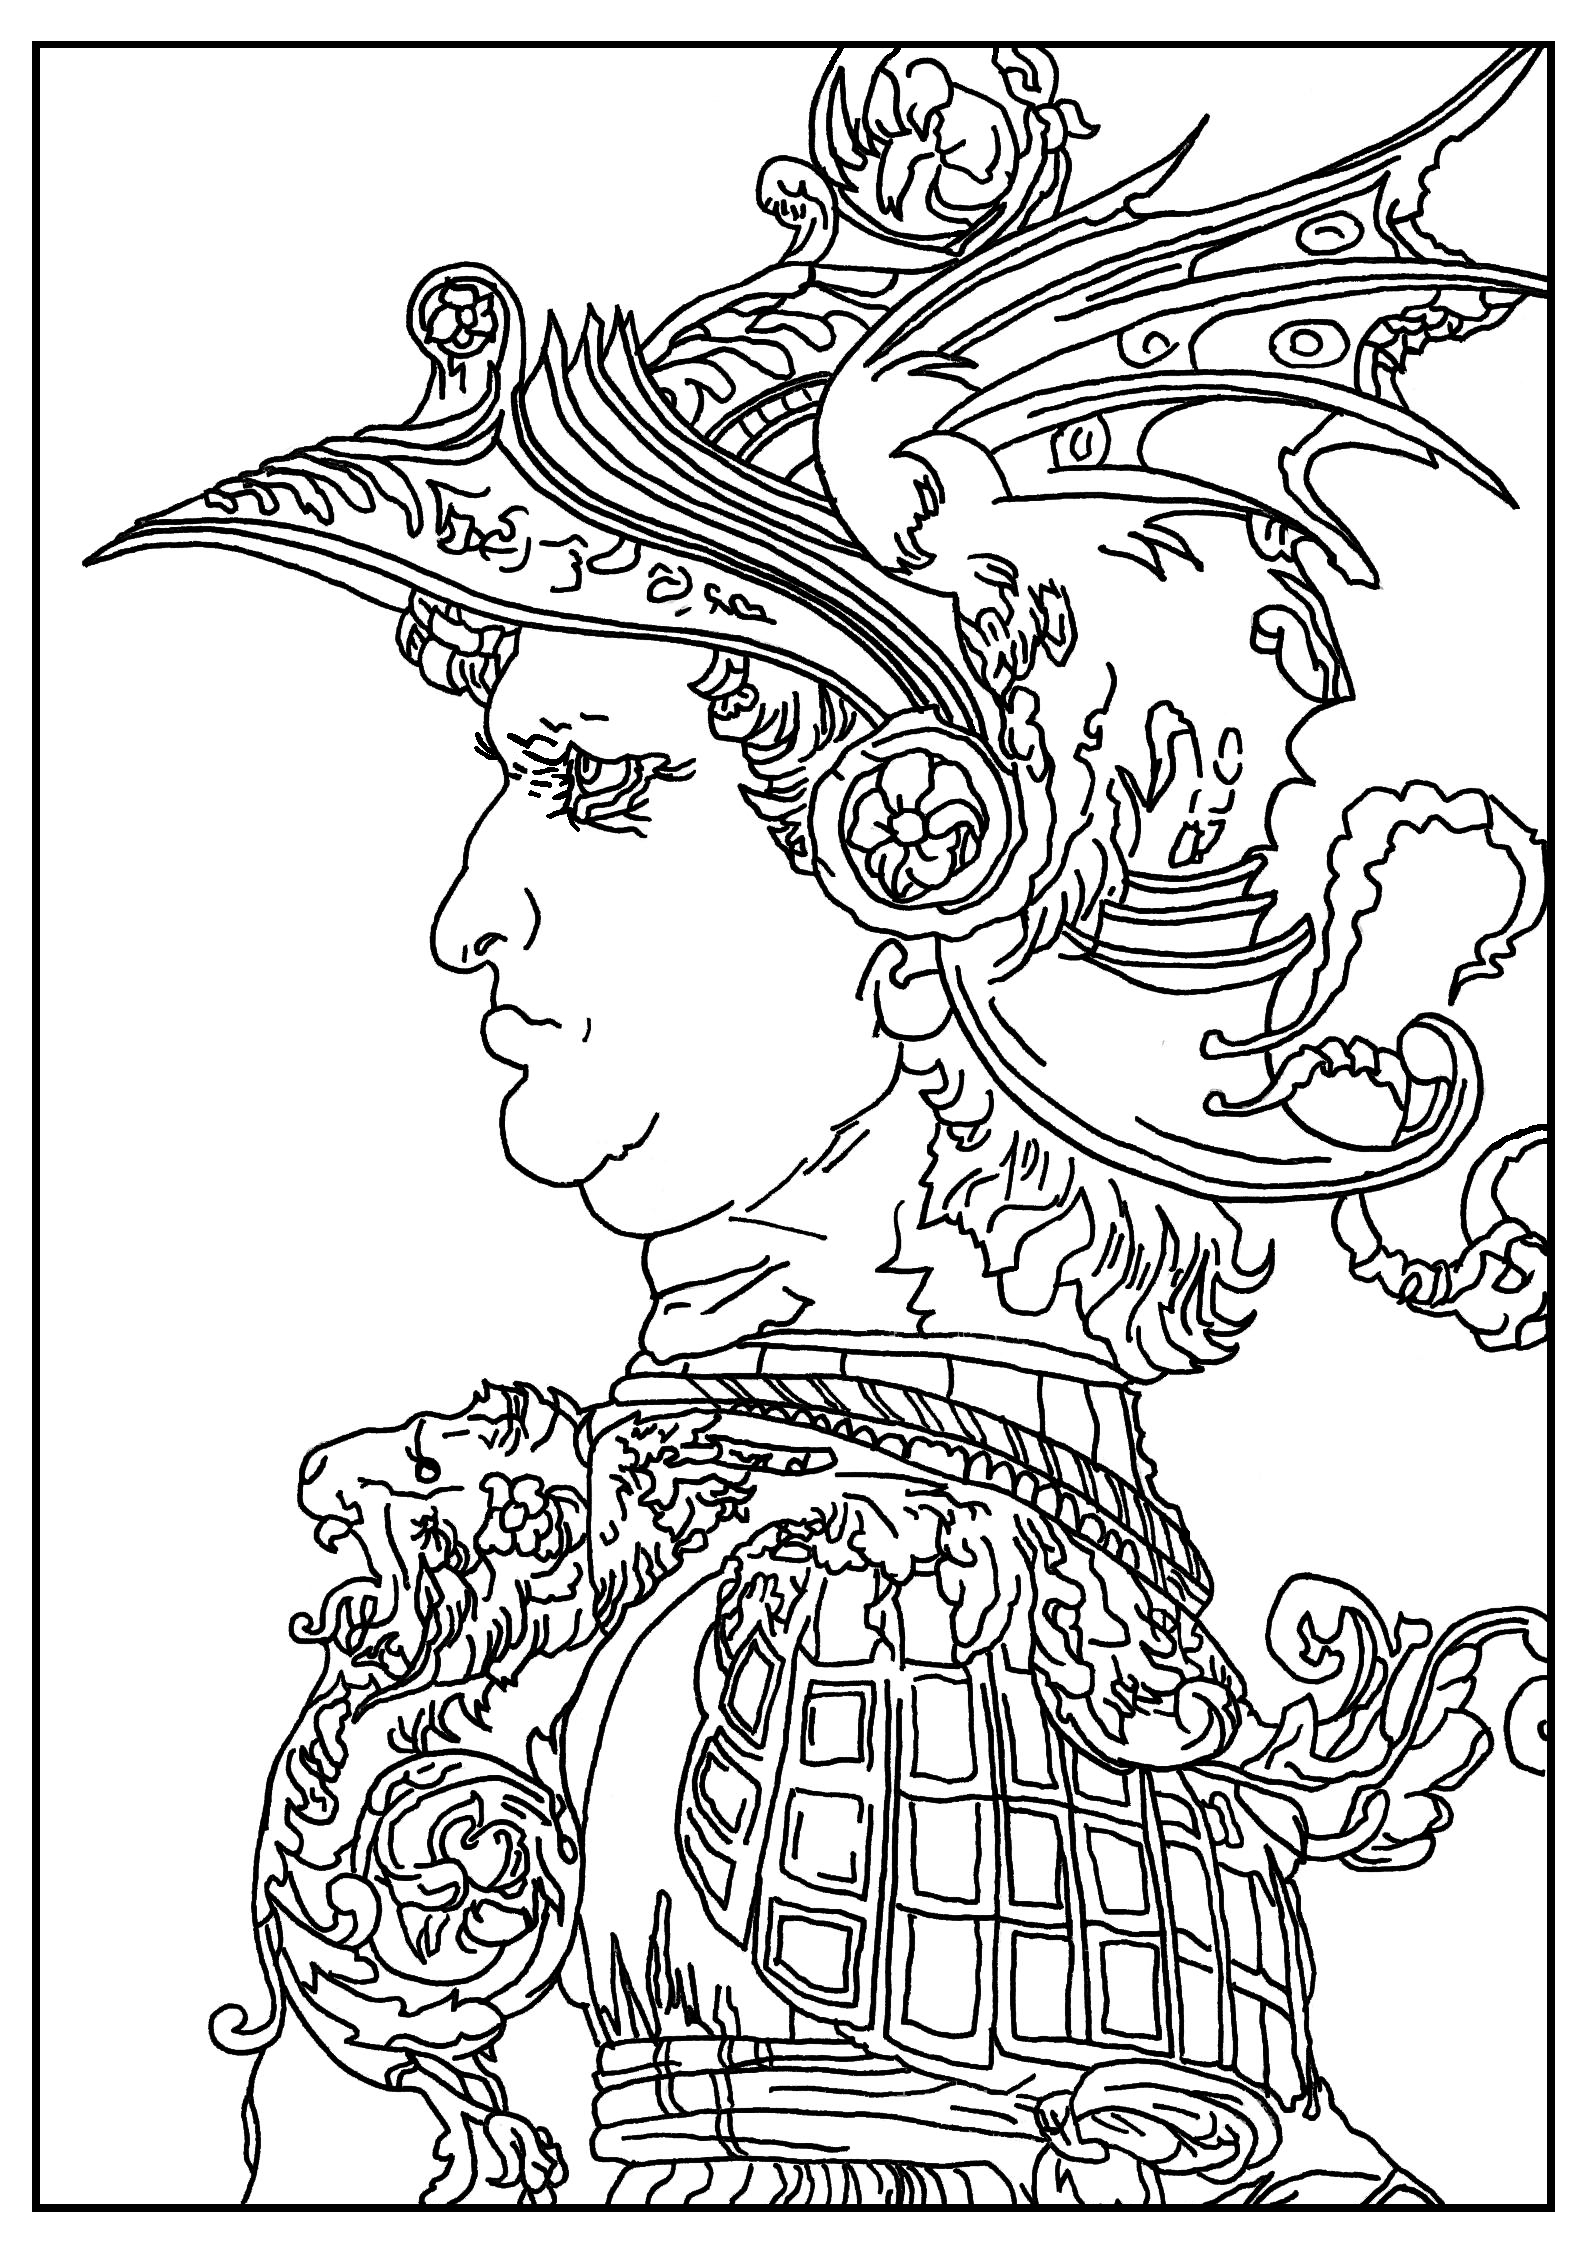 Coloring page created from a drawing by Leonardo Da Vinci : Profile of a warrior in helmet, 1477. By Sofian